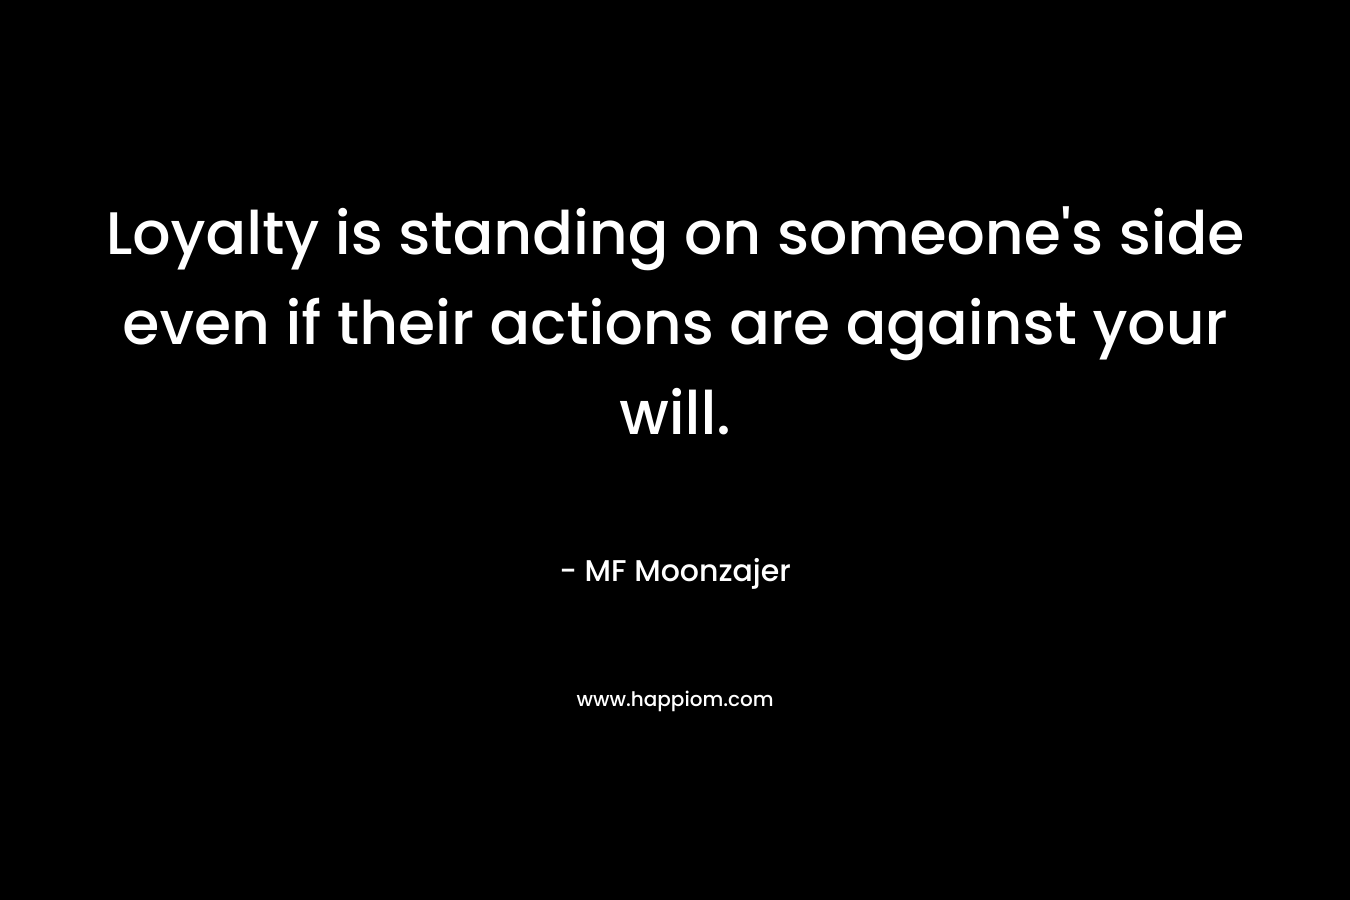 Loyalty is standing on someone’s side even if their actions are against your will. – MF Moonzajer